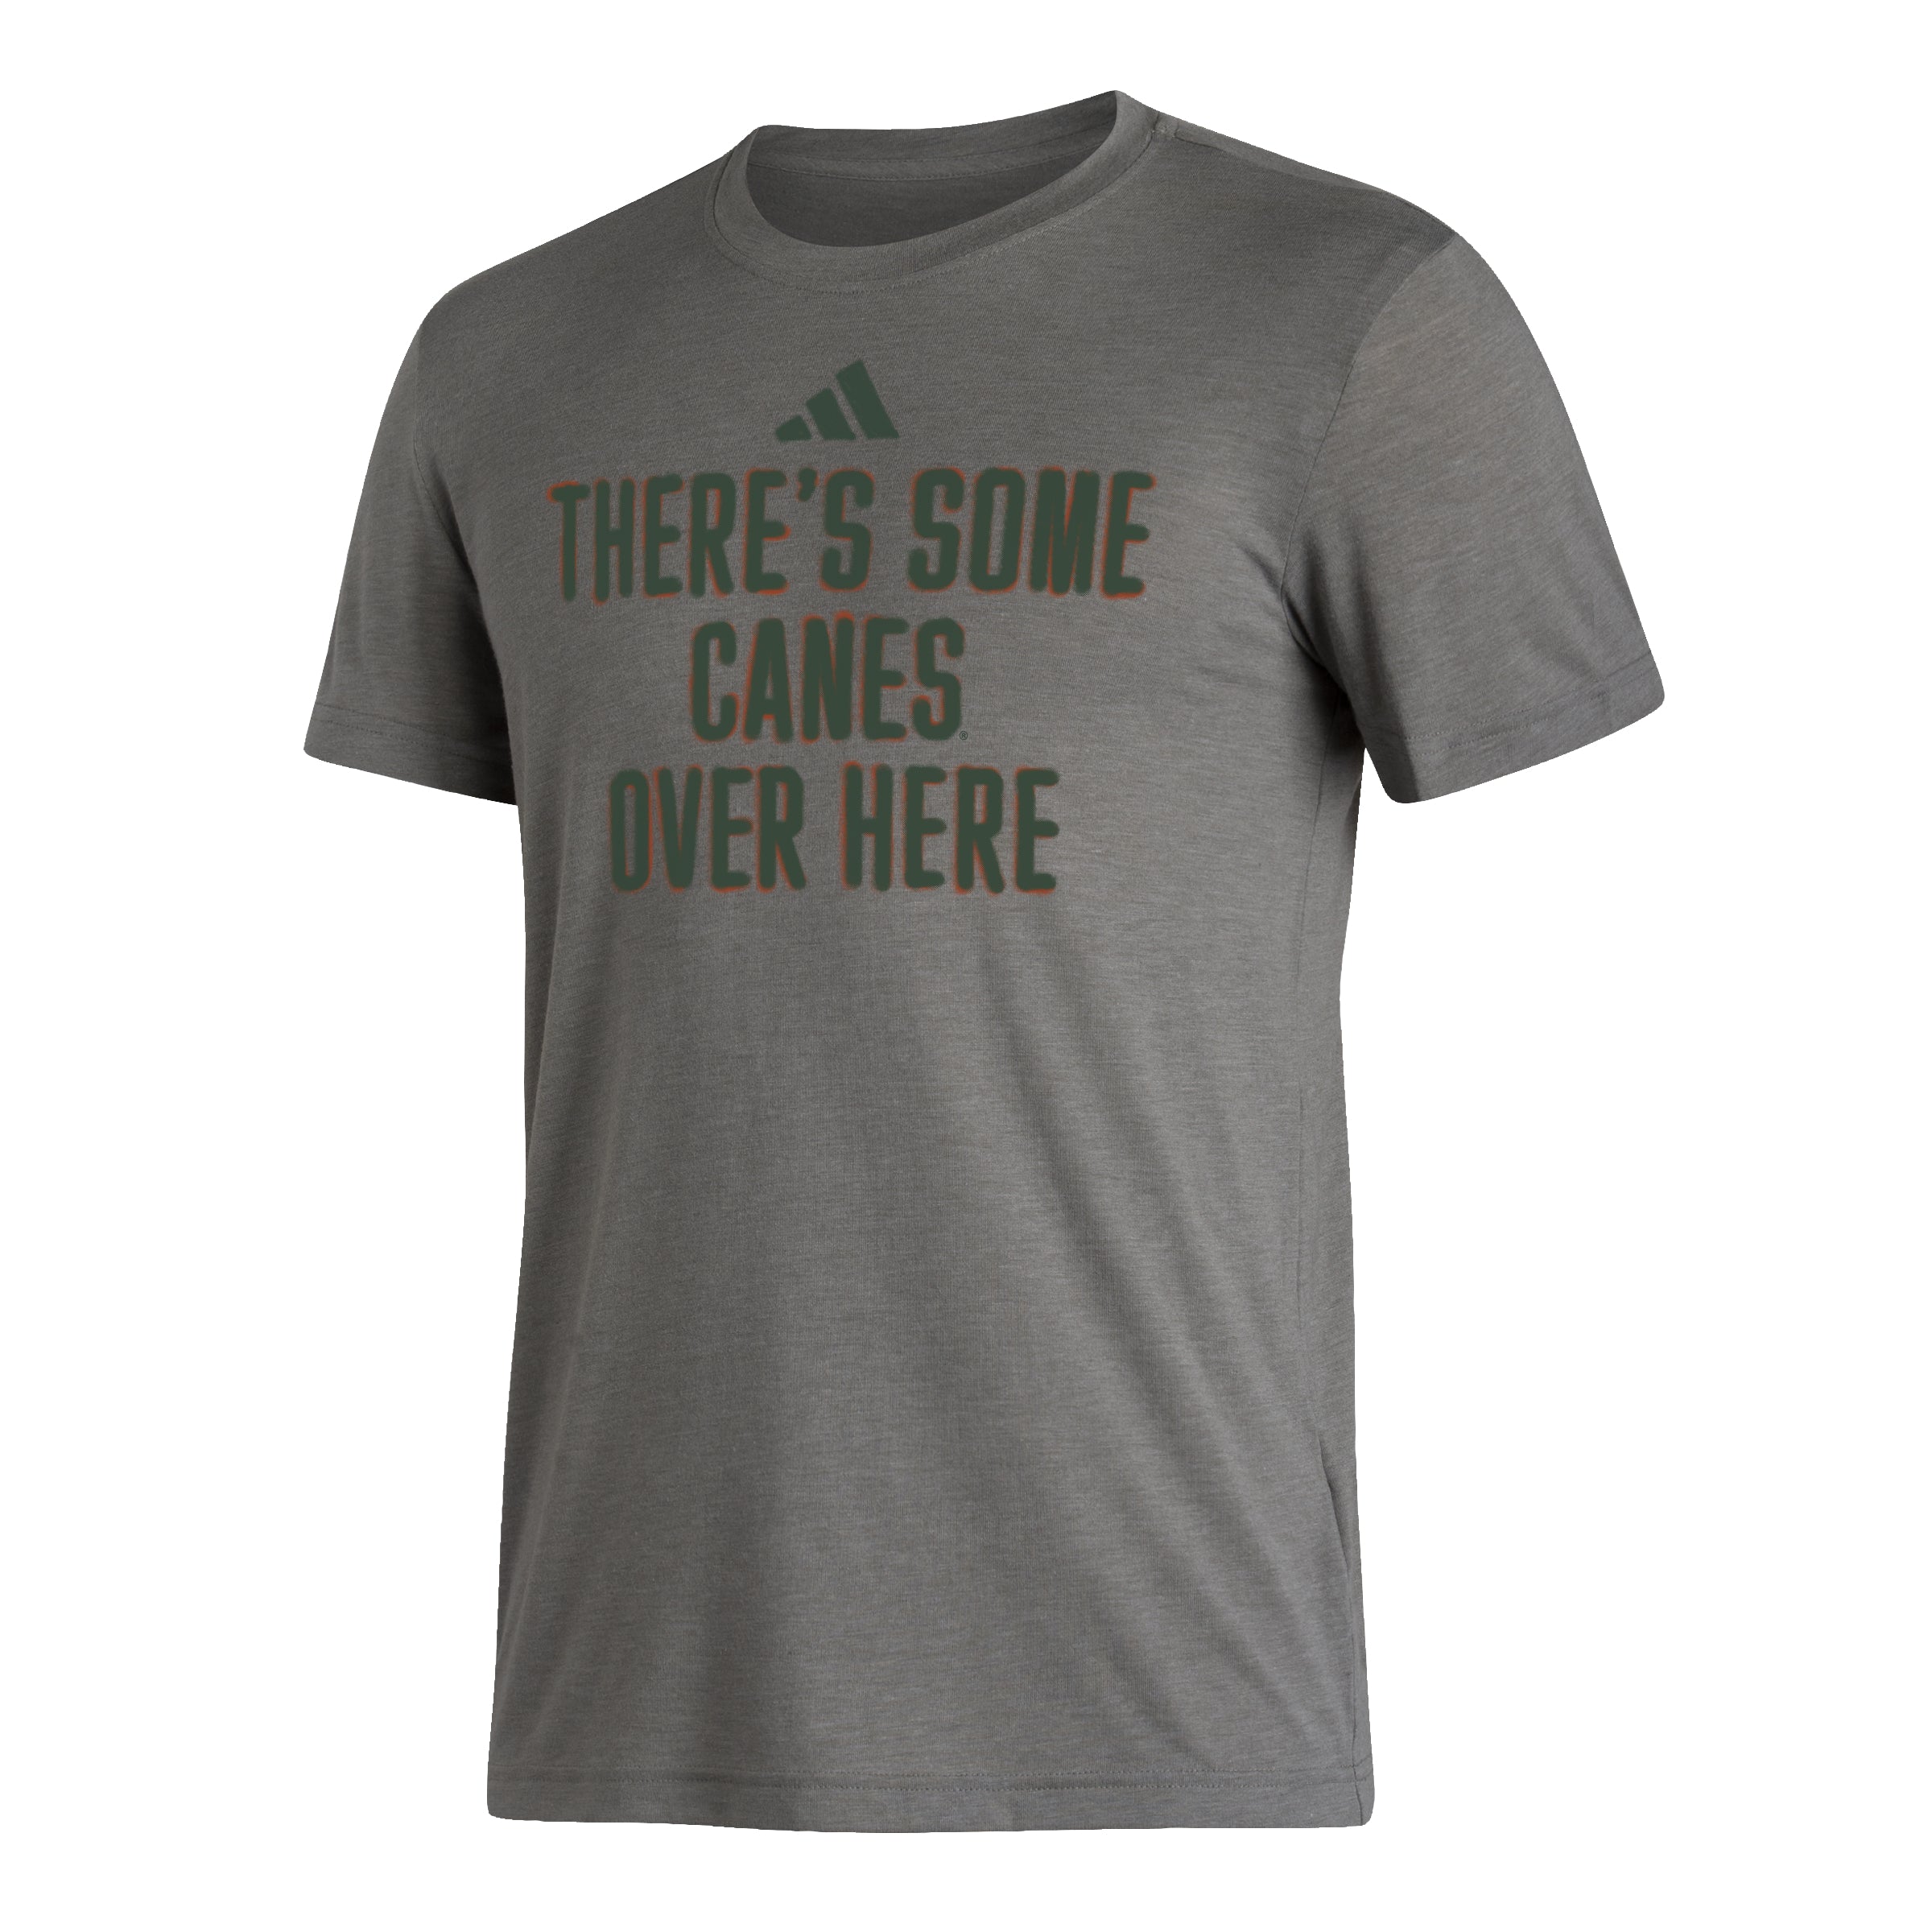 Miami Hurricanes adidas Canes Over Here Tri-blend T-Shirt - Grey